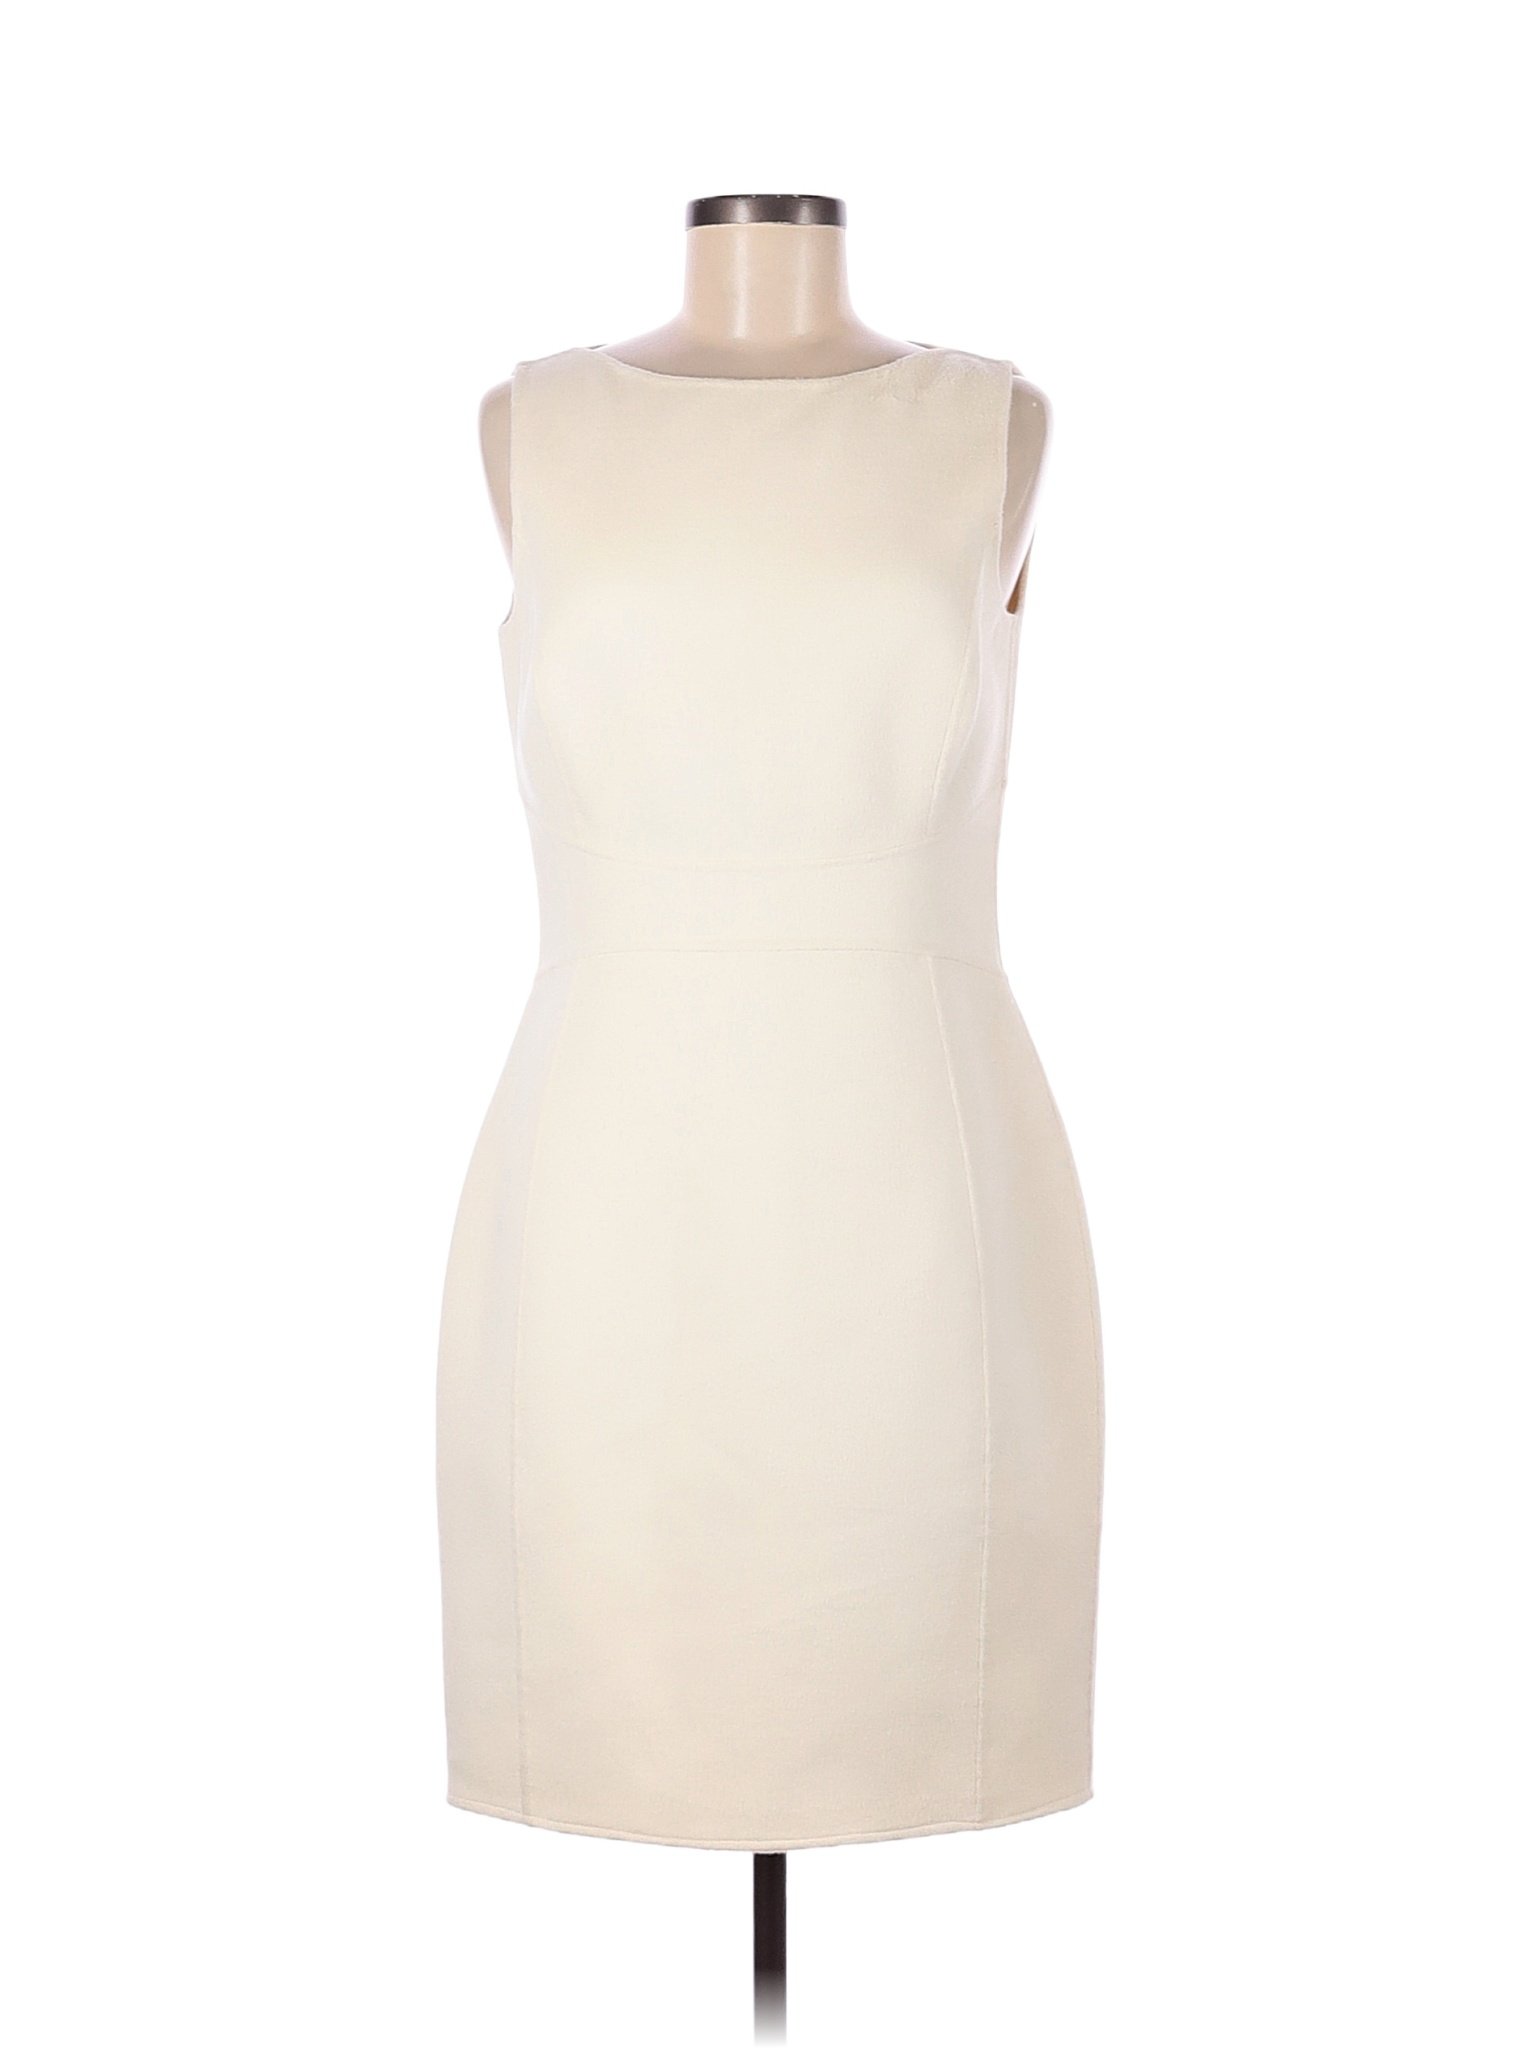 Michael Kors Solid Colored Ivory Cocktail Dress Size 8 - 81% off | thredUP